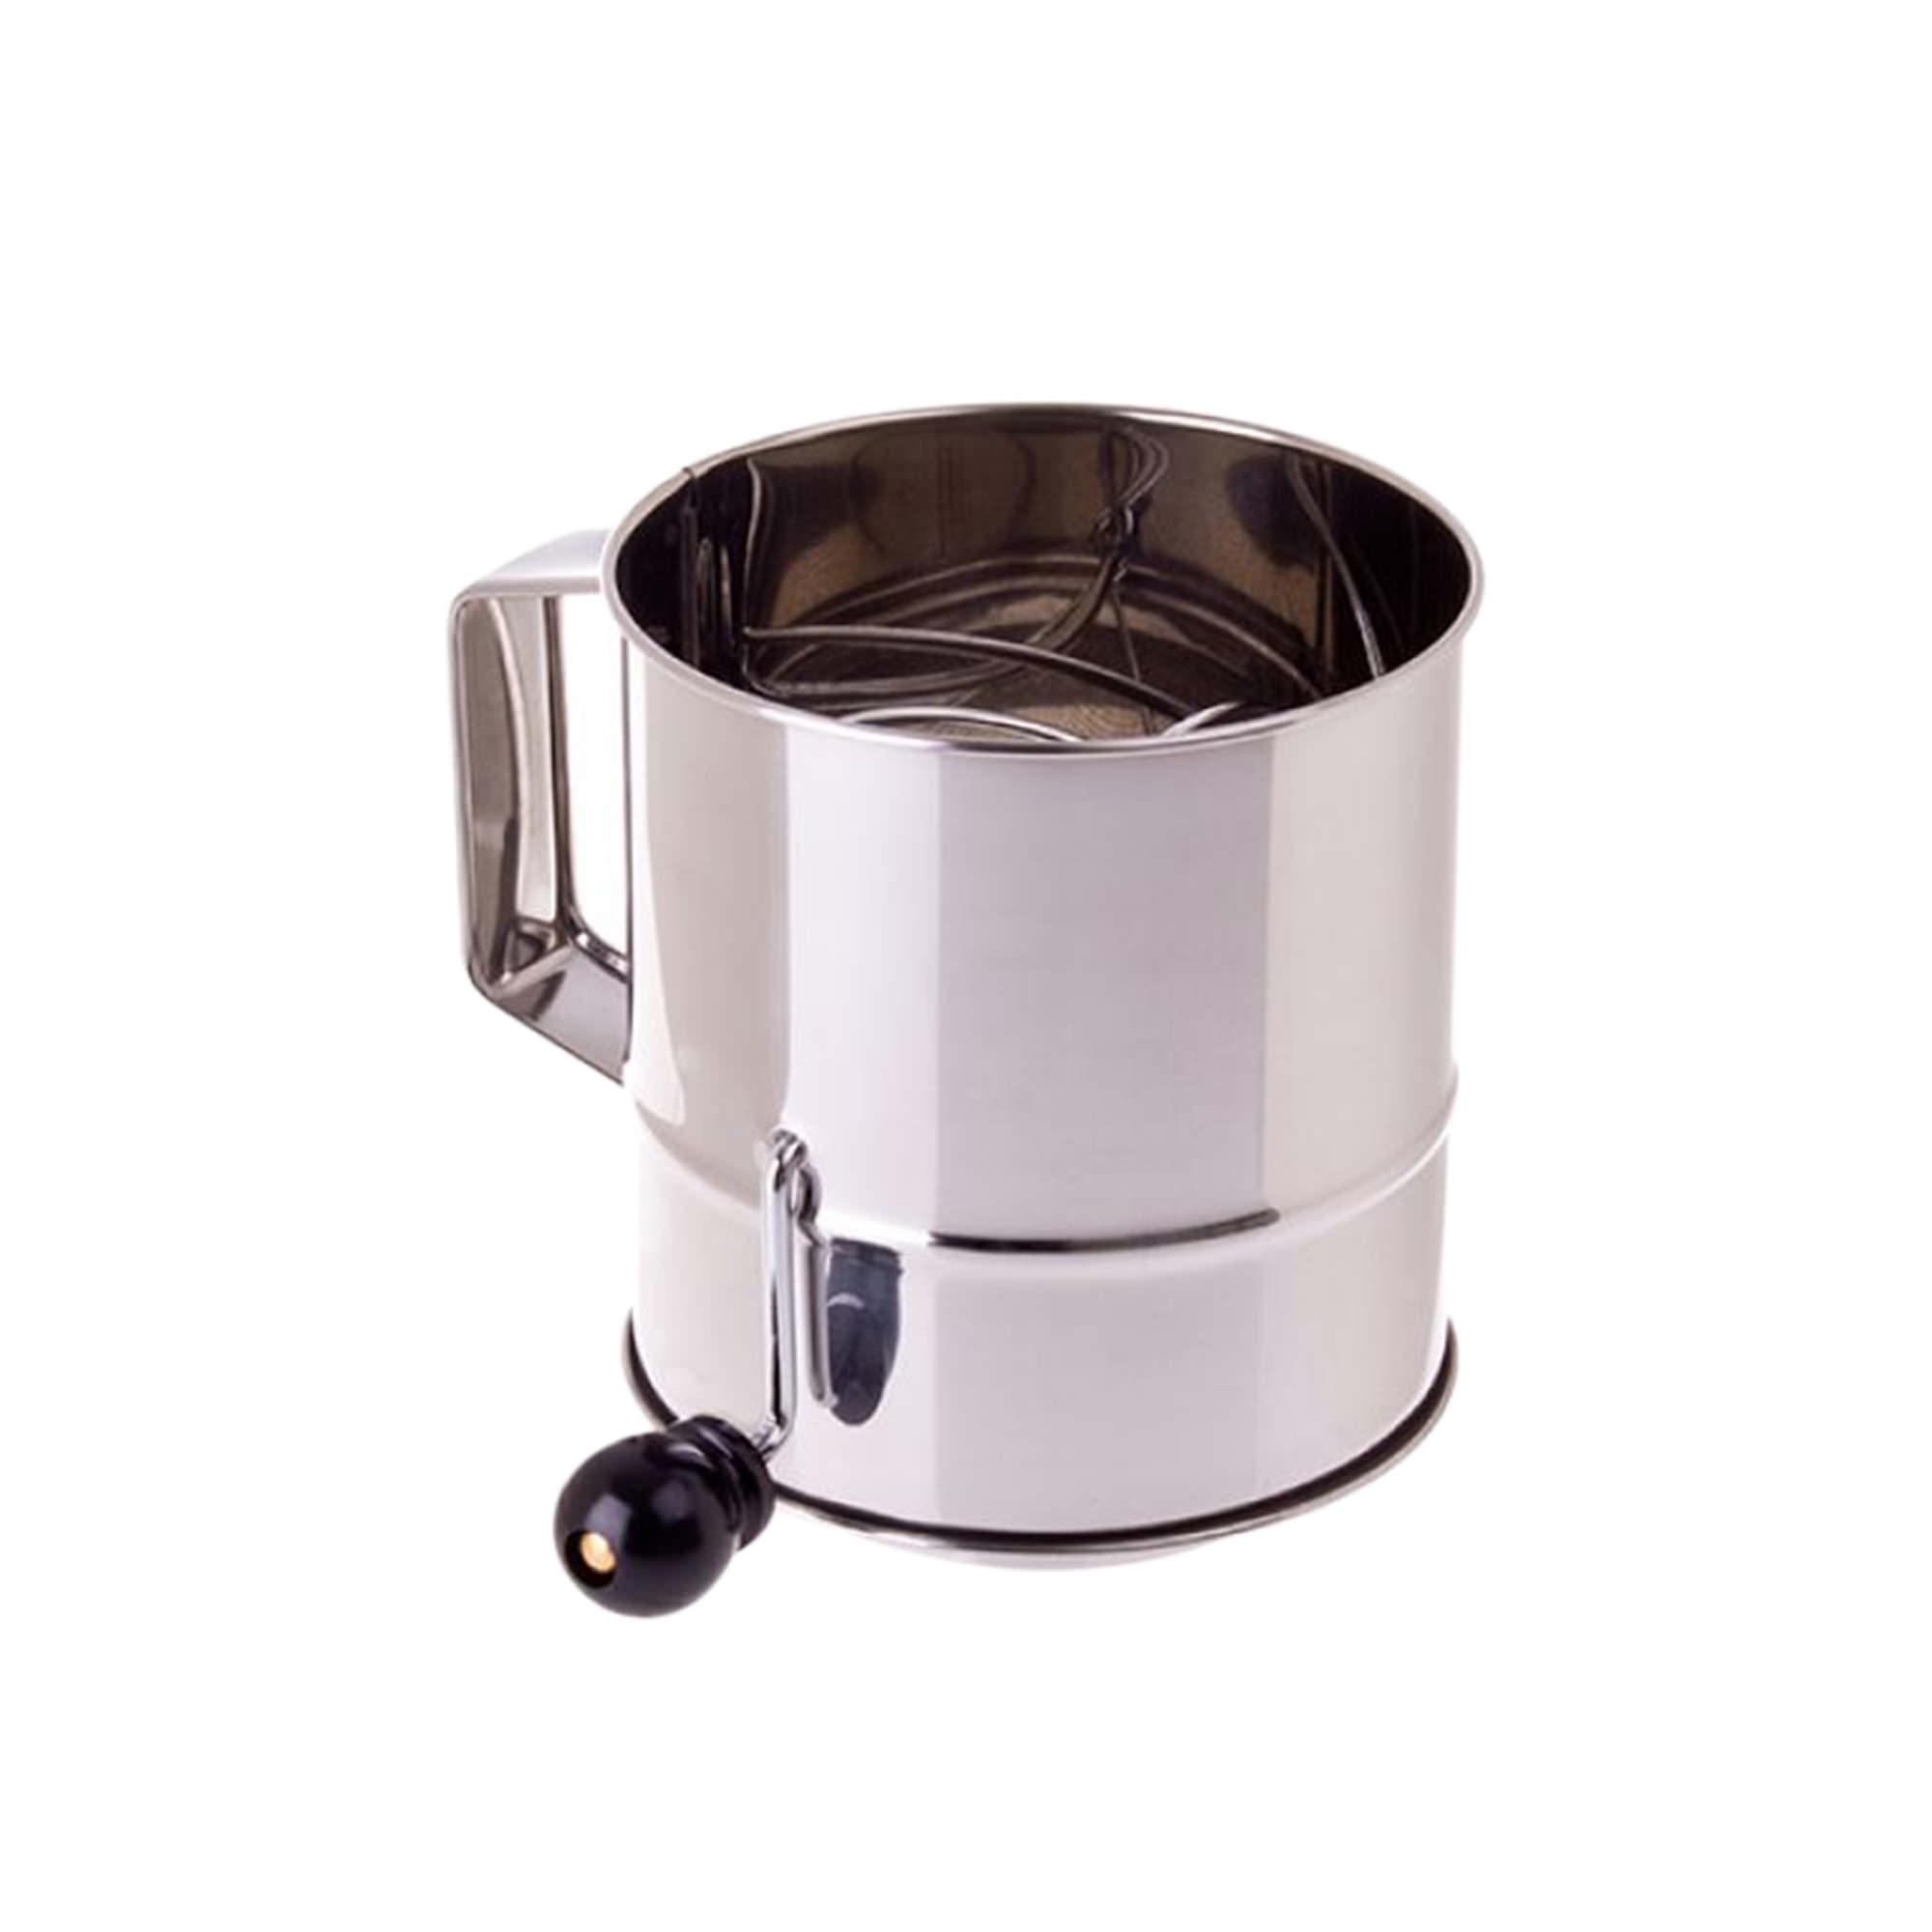 Daily Bake Flour Sifter Stainless Steel 5 Cup Image 1